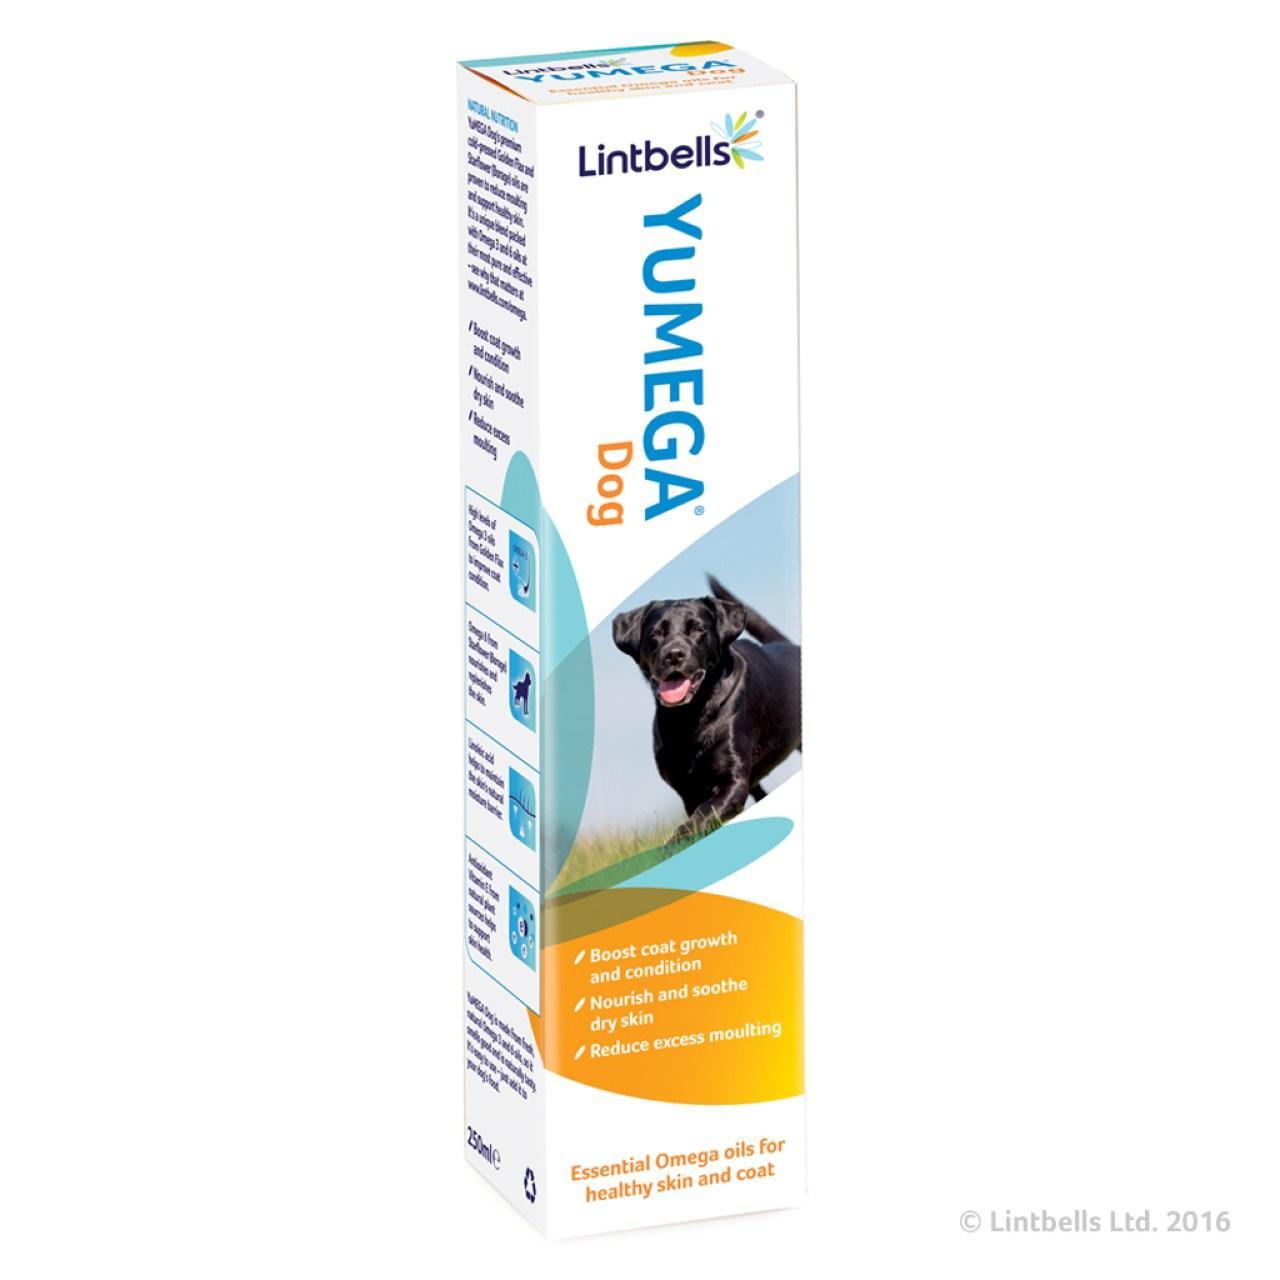 An image of YuMEGA dog supplement to improve skin & coat condition